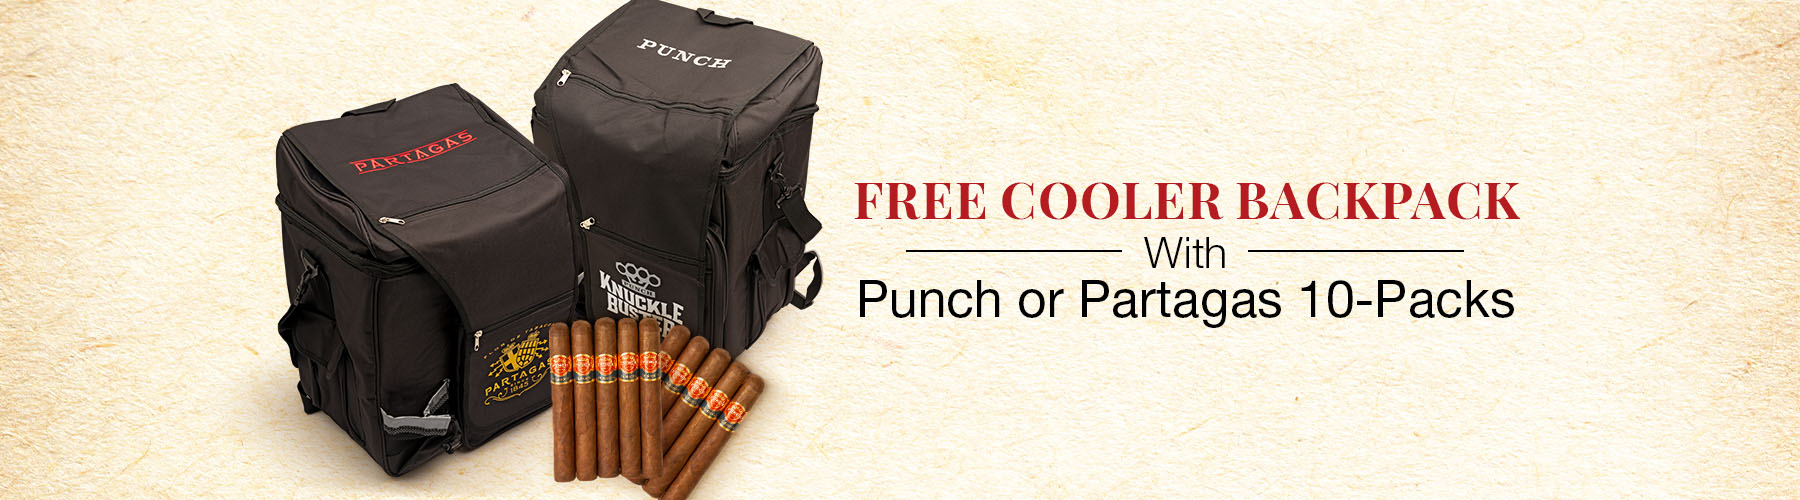 Free Cooler Backpack with Punch or Partagas 10-Packs!